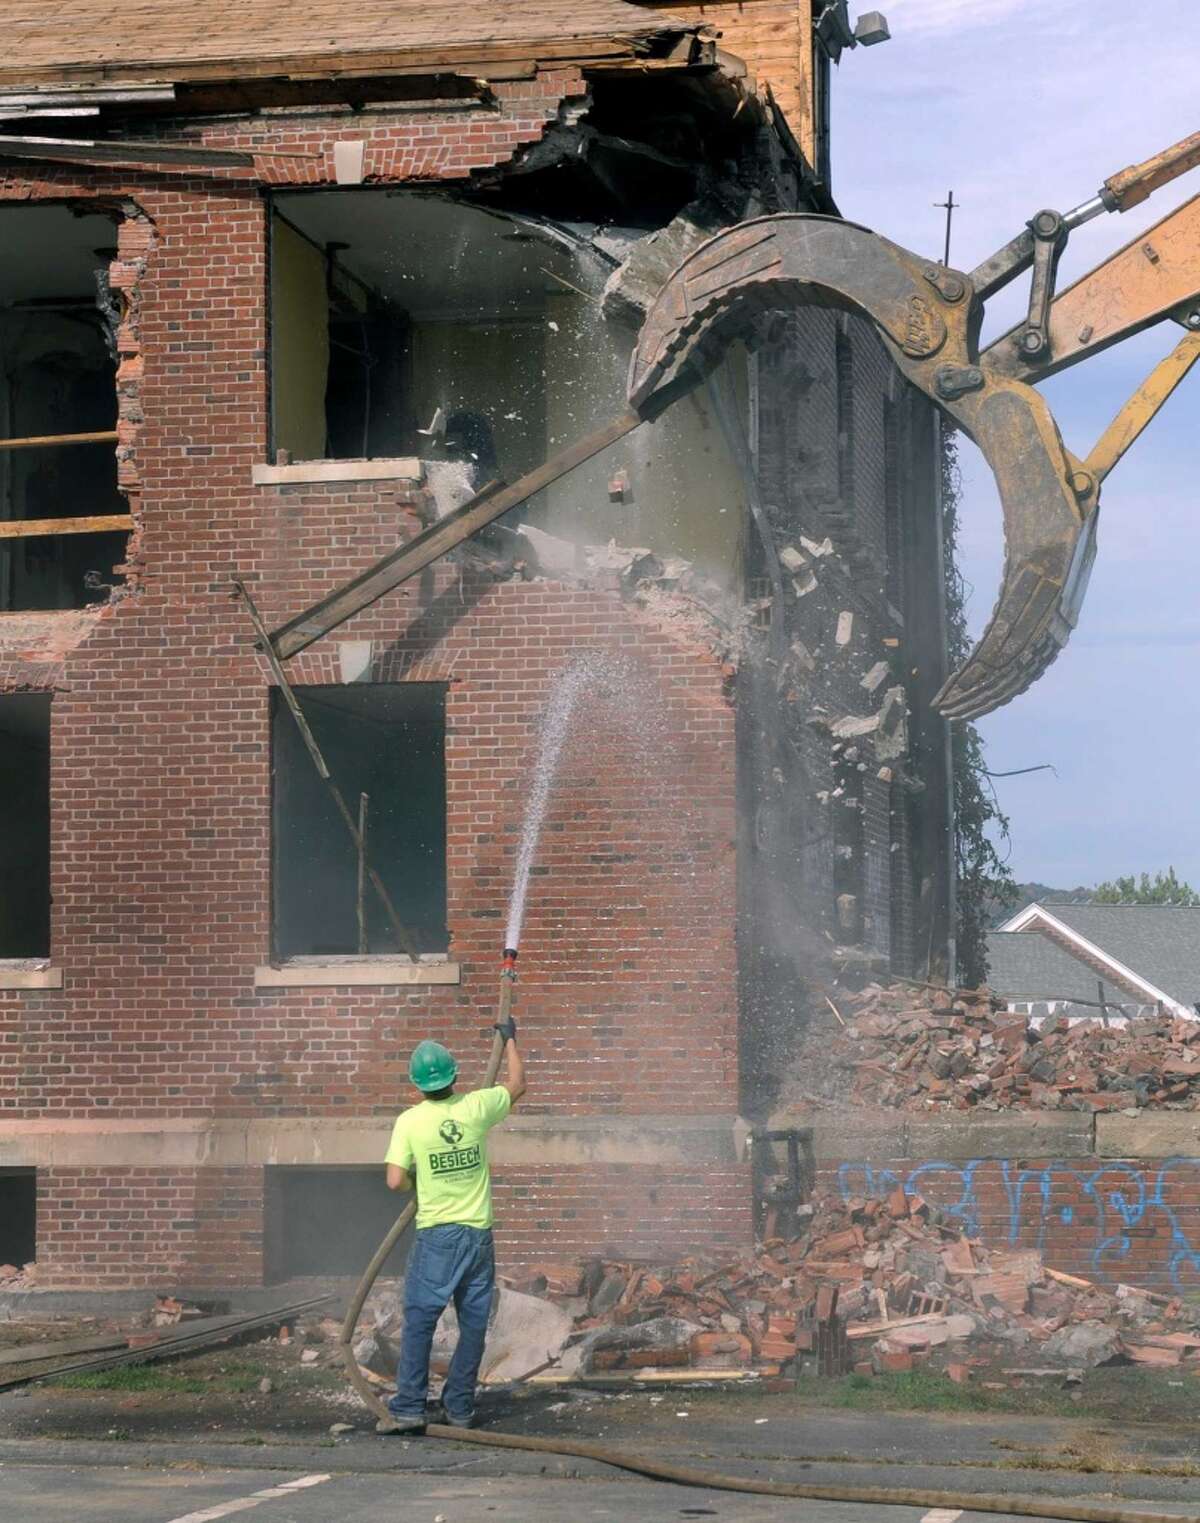 The demolition of Danbury Hall is underway at Fairfield Hills in Newtown, Conn. Julio Argueta keeps the water flowing to control the dust from the debris as an excavator run by Andy Bowolick, wacks the side of the building, Monday, Sept. 29, 2014.